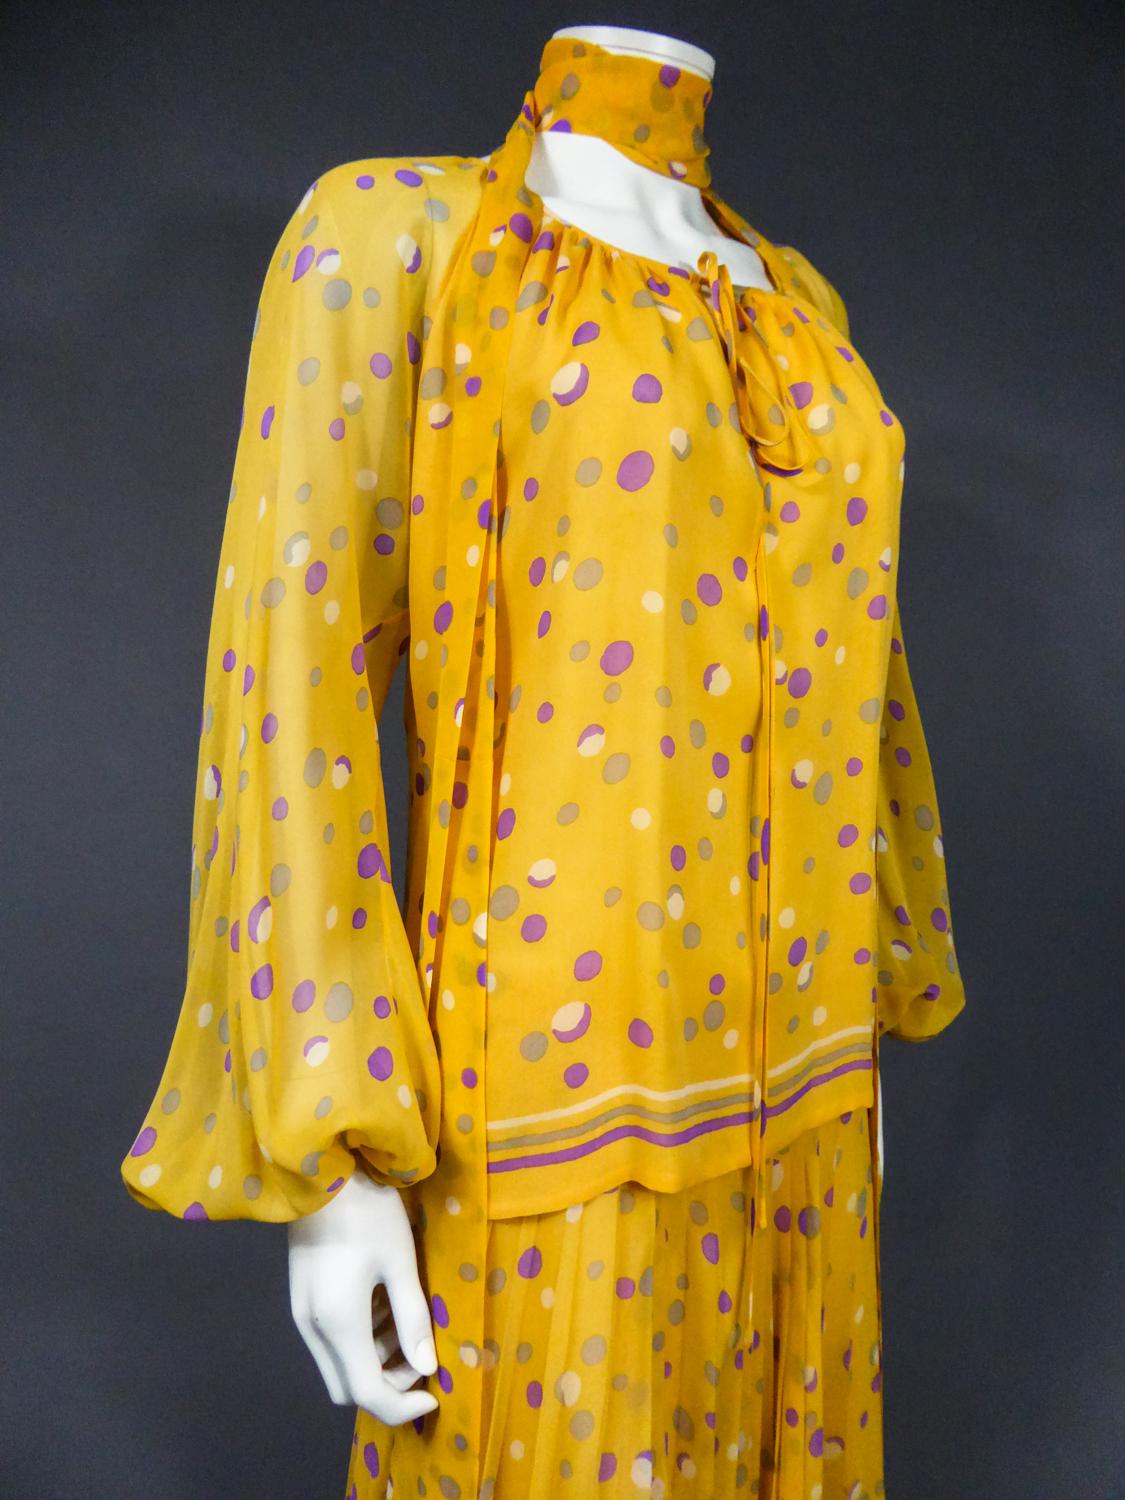 Circa 1970/1975
France

Haute Couture skirt, blouse and scarf set in silk crepe printed with Modern Art patterns of the most prolific period of Yves Saint Laurent in the 1970s. Sunrise yellow printed mousseline with purple, gray and white dots